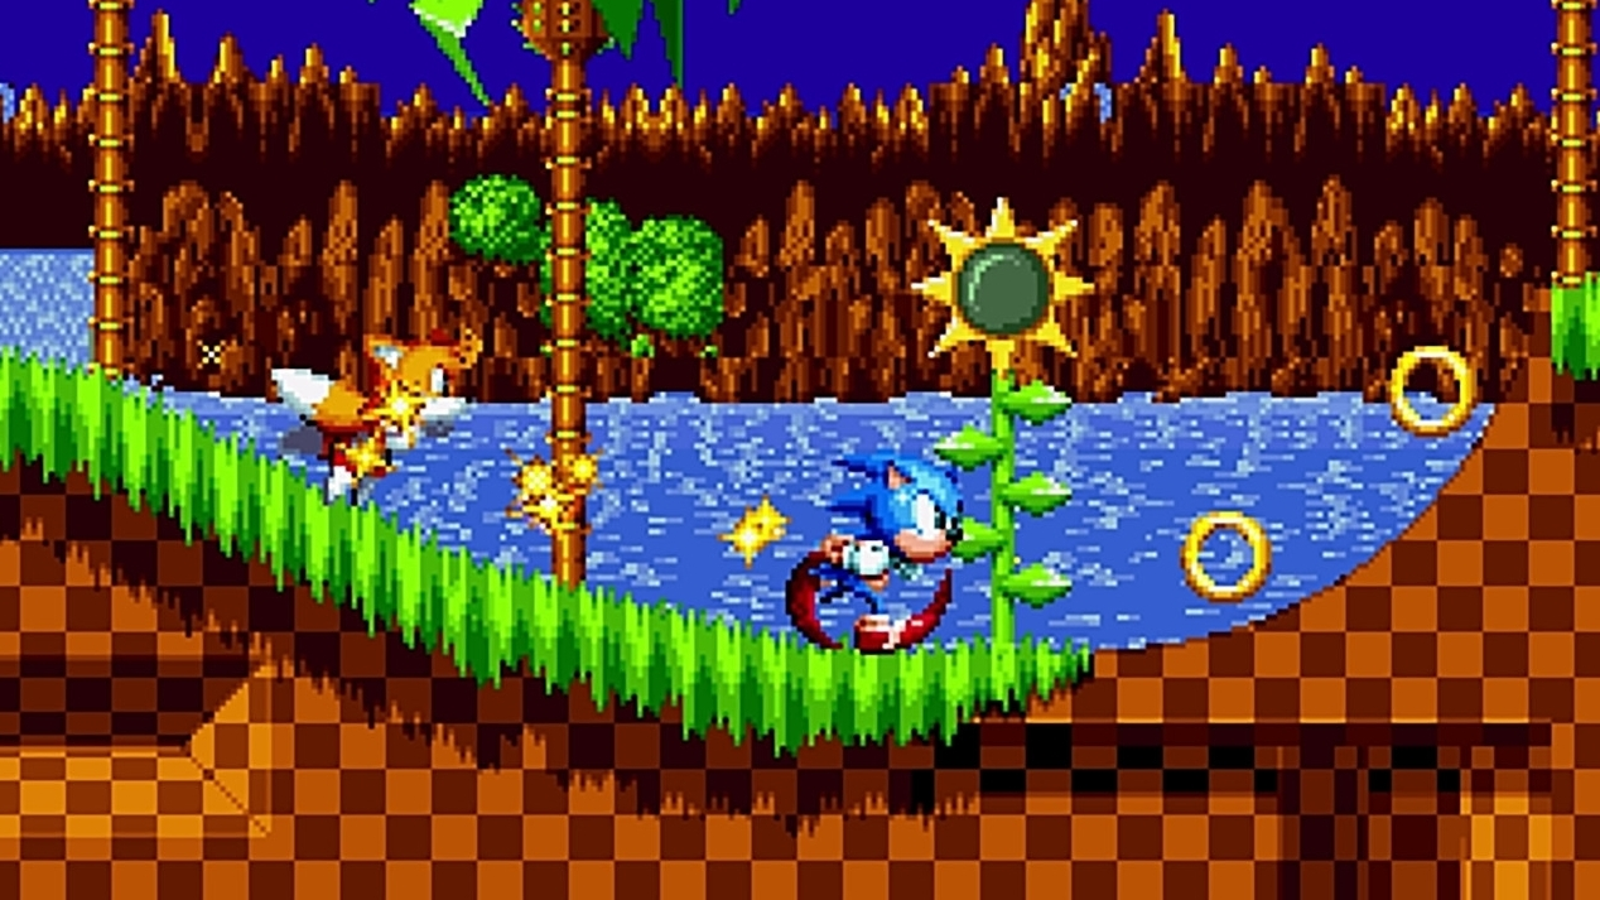 Sonic Mania is currently free on the Epic Games Store